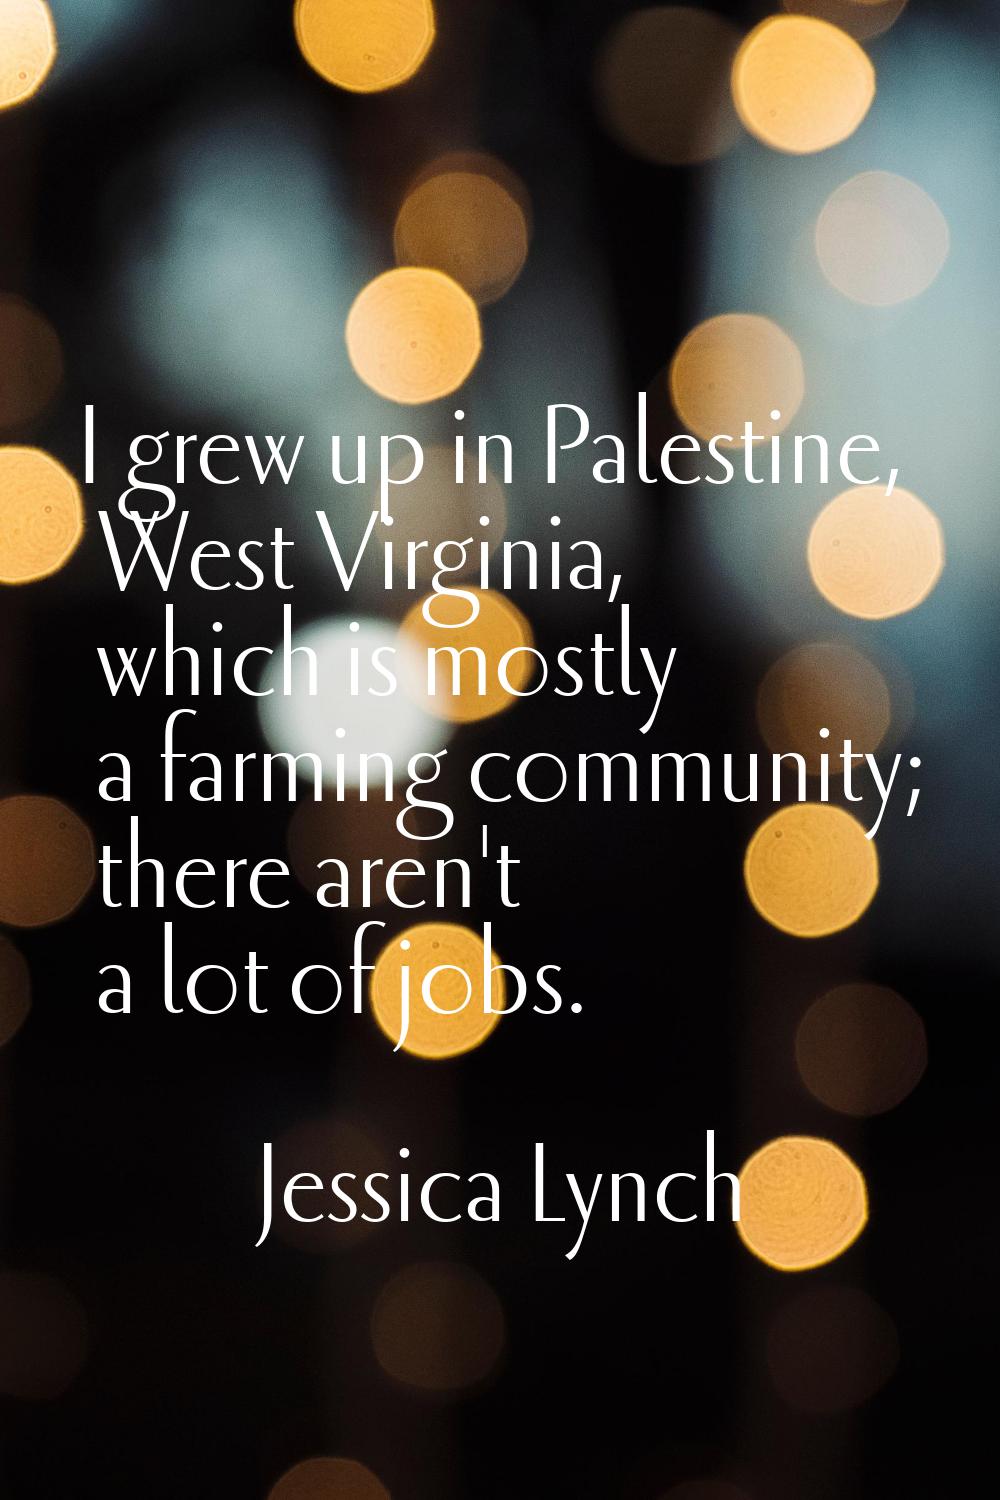 I grew up in Palestine, West Virginia, which is mostly a farming community; there aren't a lot of j